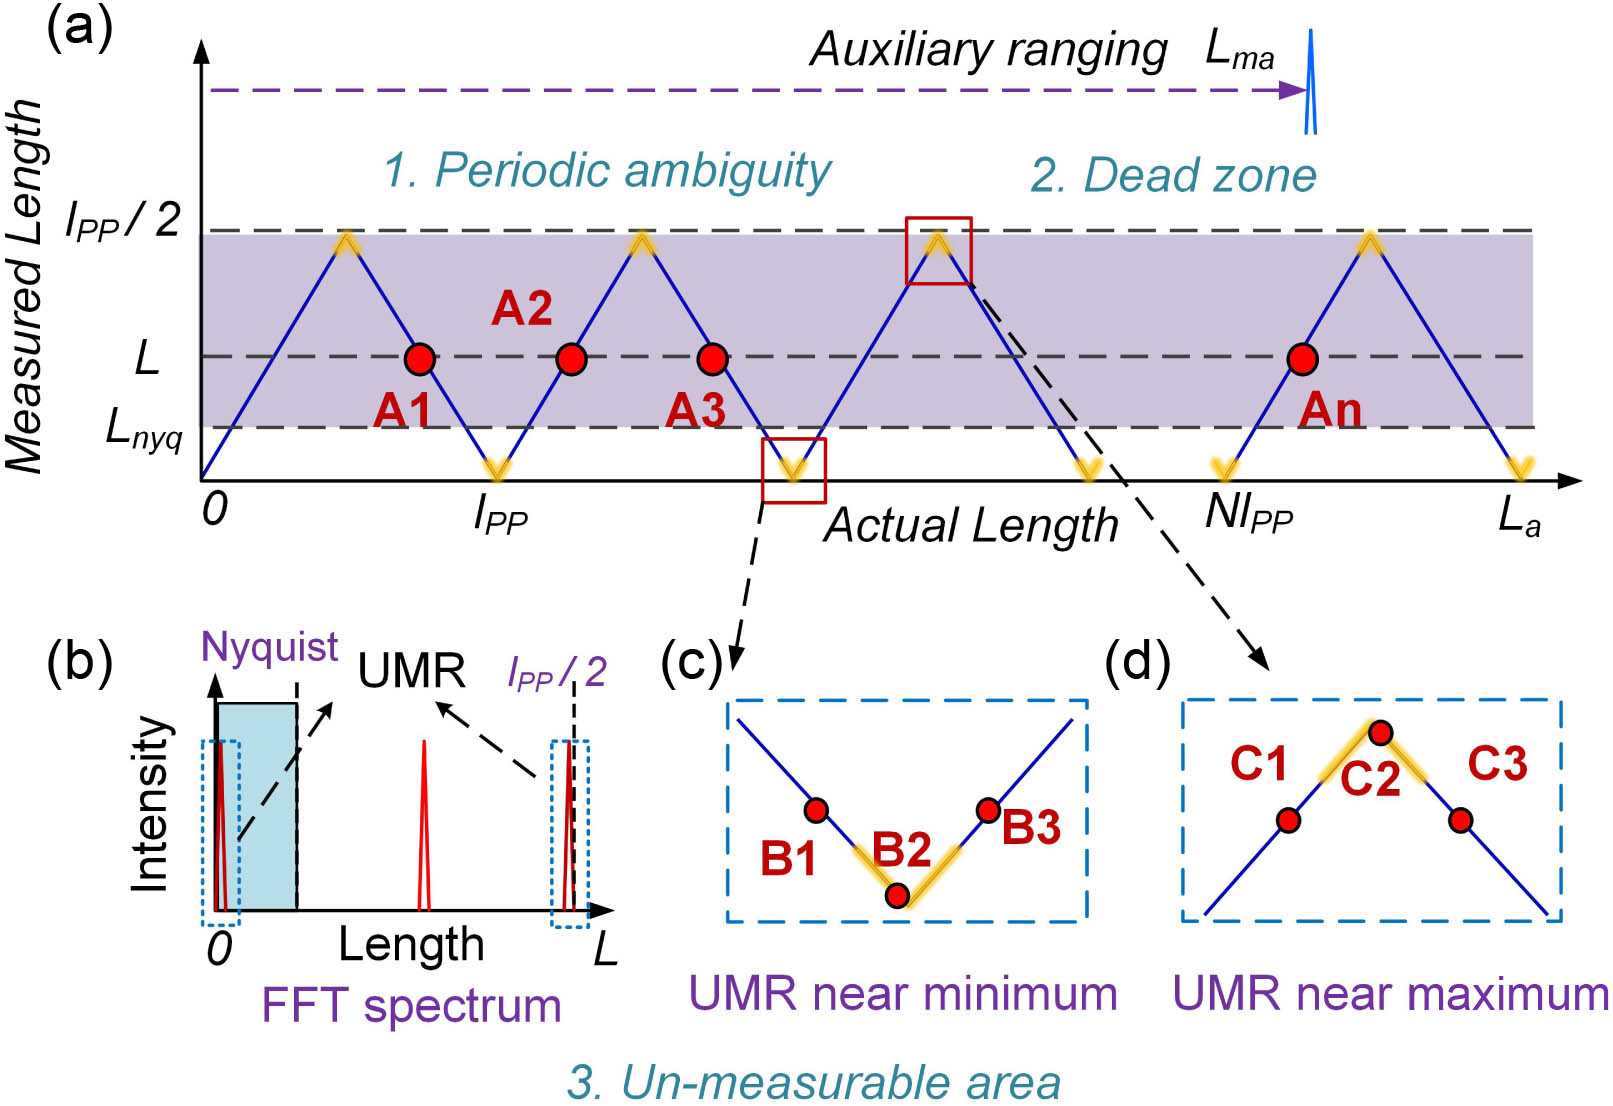 Existing issues associated with the conventional SPI length metrology. (a) The periodic ambiguities and the dead zones due to inadequate sampling rate and the data characteristics, which collectively result in the presence of prolonged un-measurable areas, marked with light purple. (b) The FFT spectra of interference data, where the Nyquist frequency limits the measurable region, marked in light blue. (c) and (d) Unmeasurable regions near the minimum and the maximum positions. An, Bn, and Cn are representative positions to be measured. UMR, unmeasurable region; FFT, fast Fourier transform.